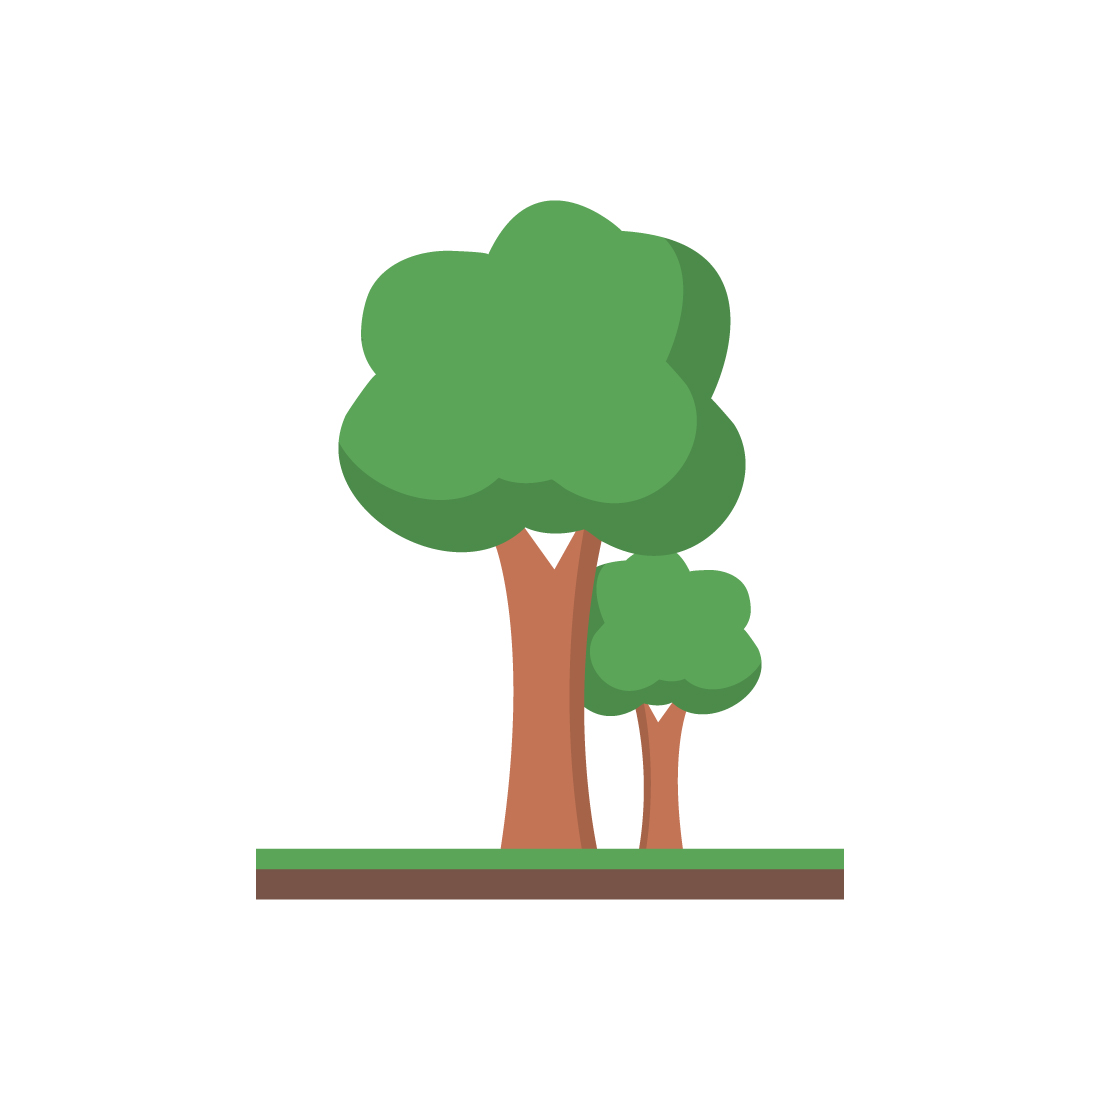 This is a Tree Illustration On White Background preview image.